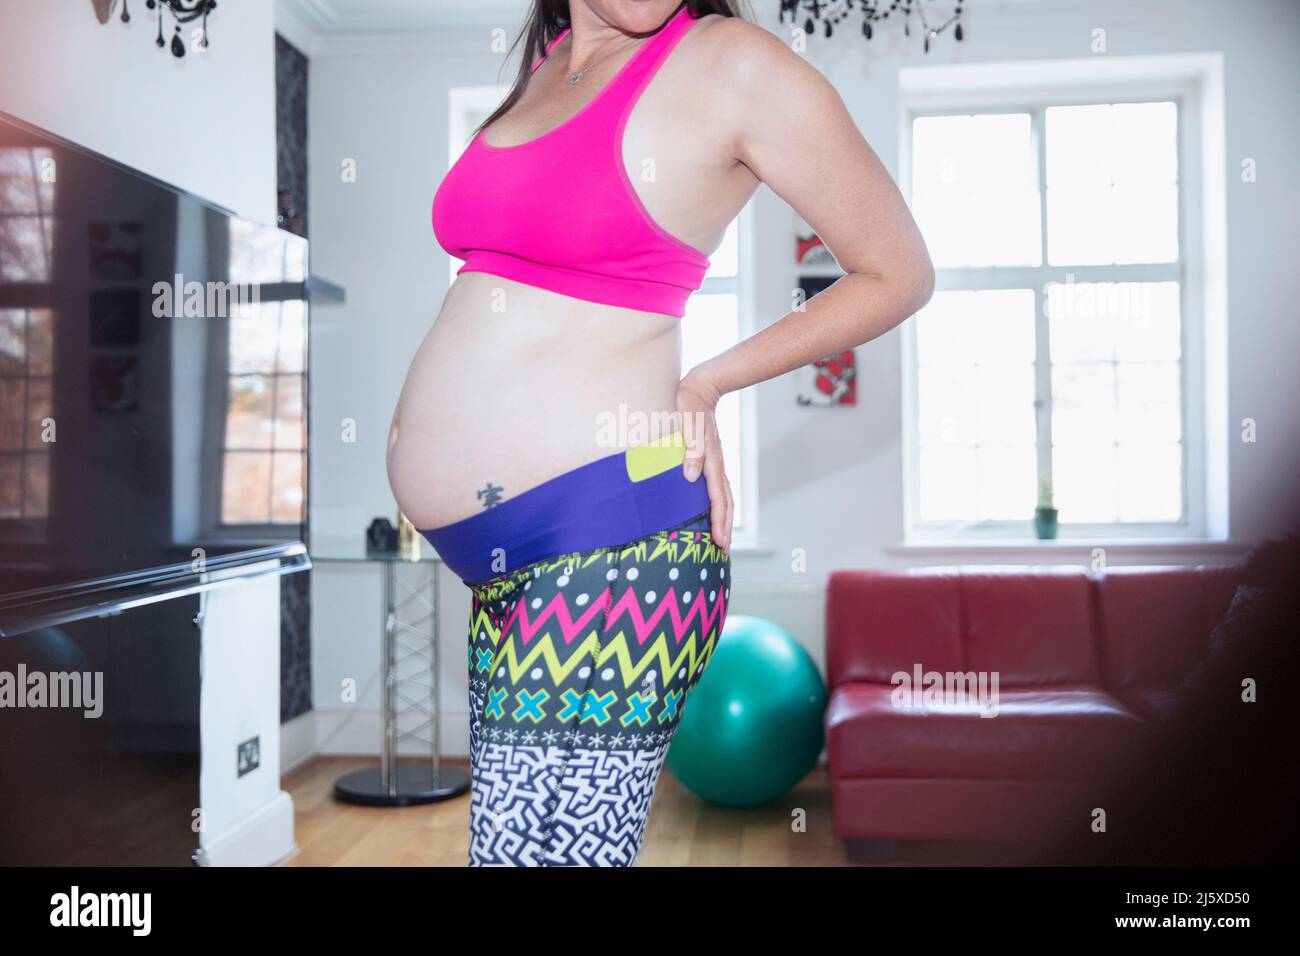 Pregnant woman in sports bra and leggings exercising at home Stock